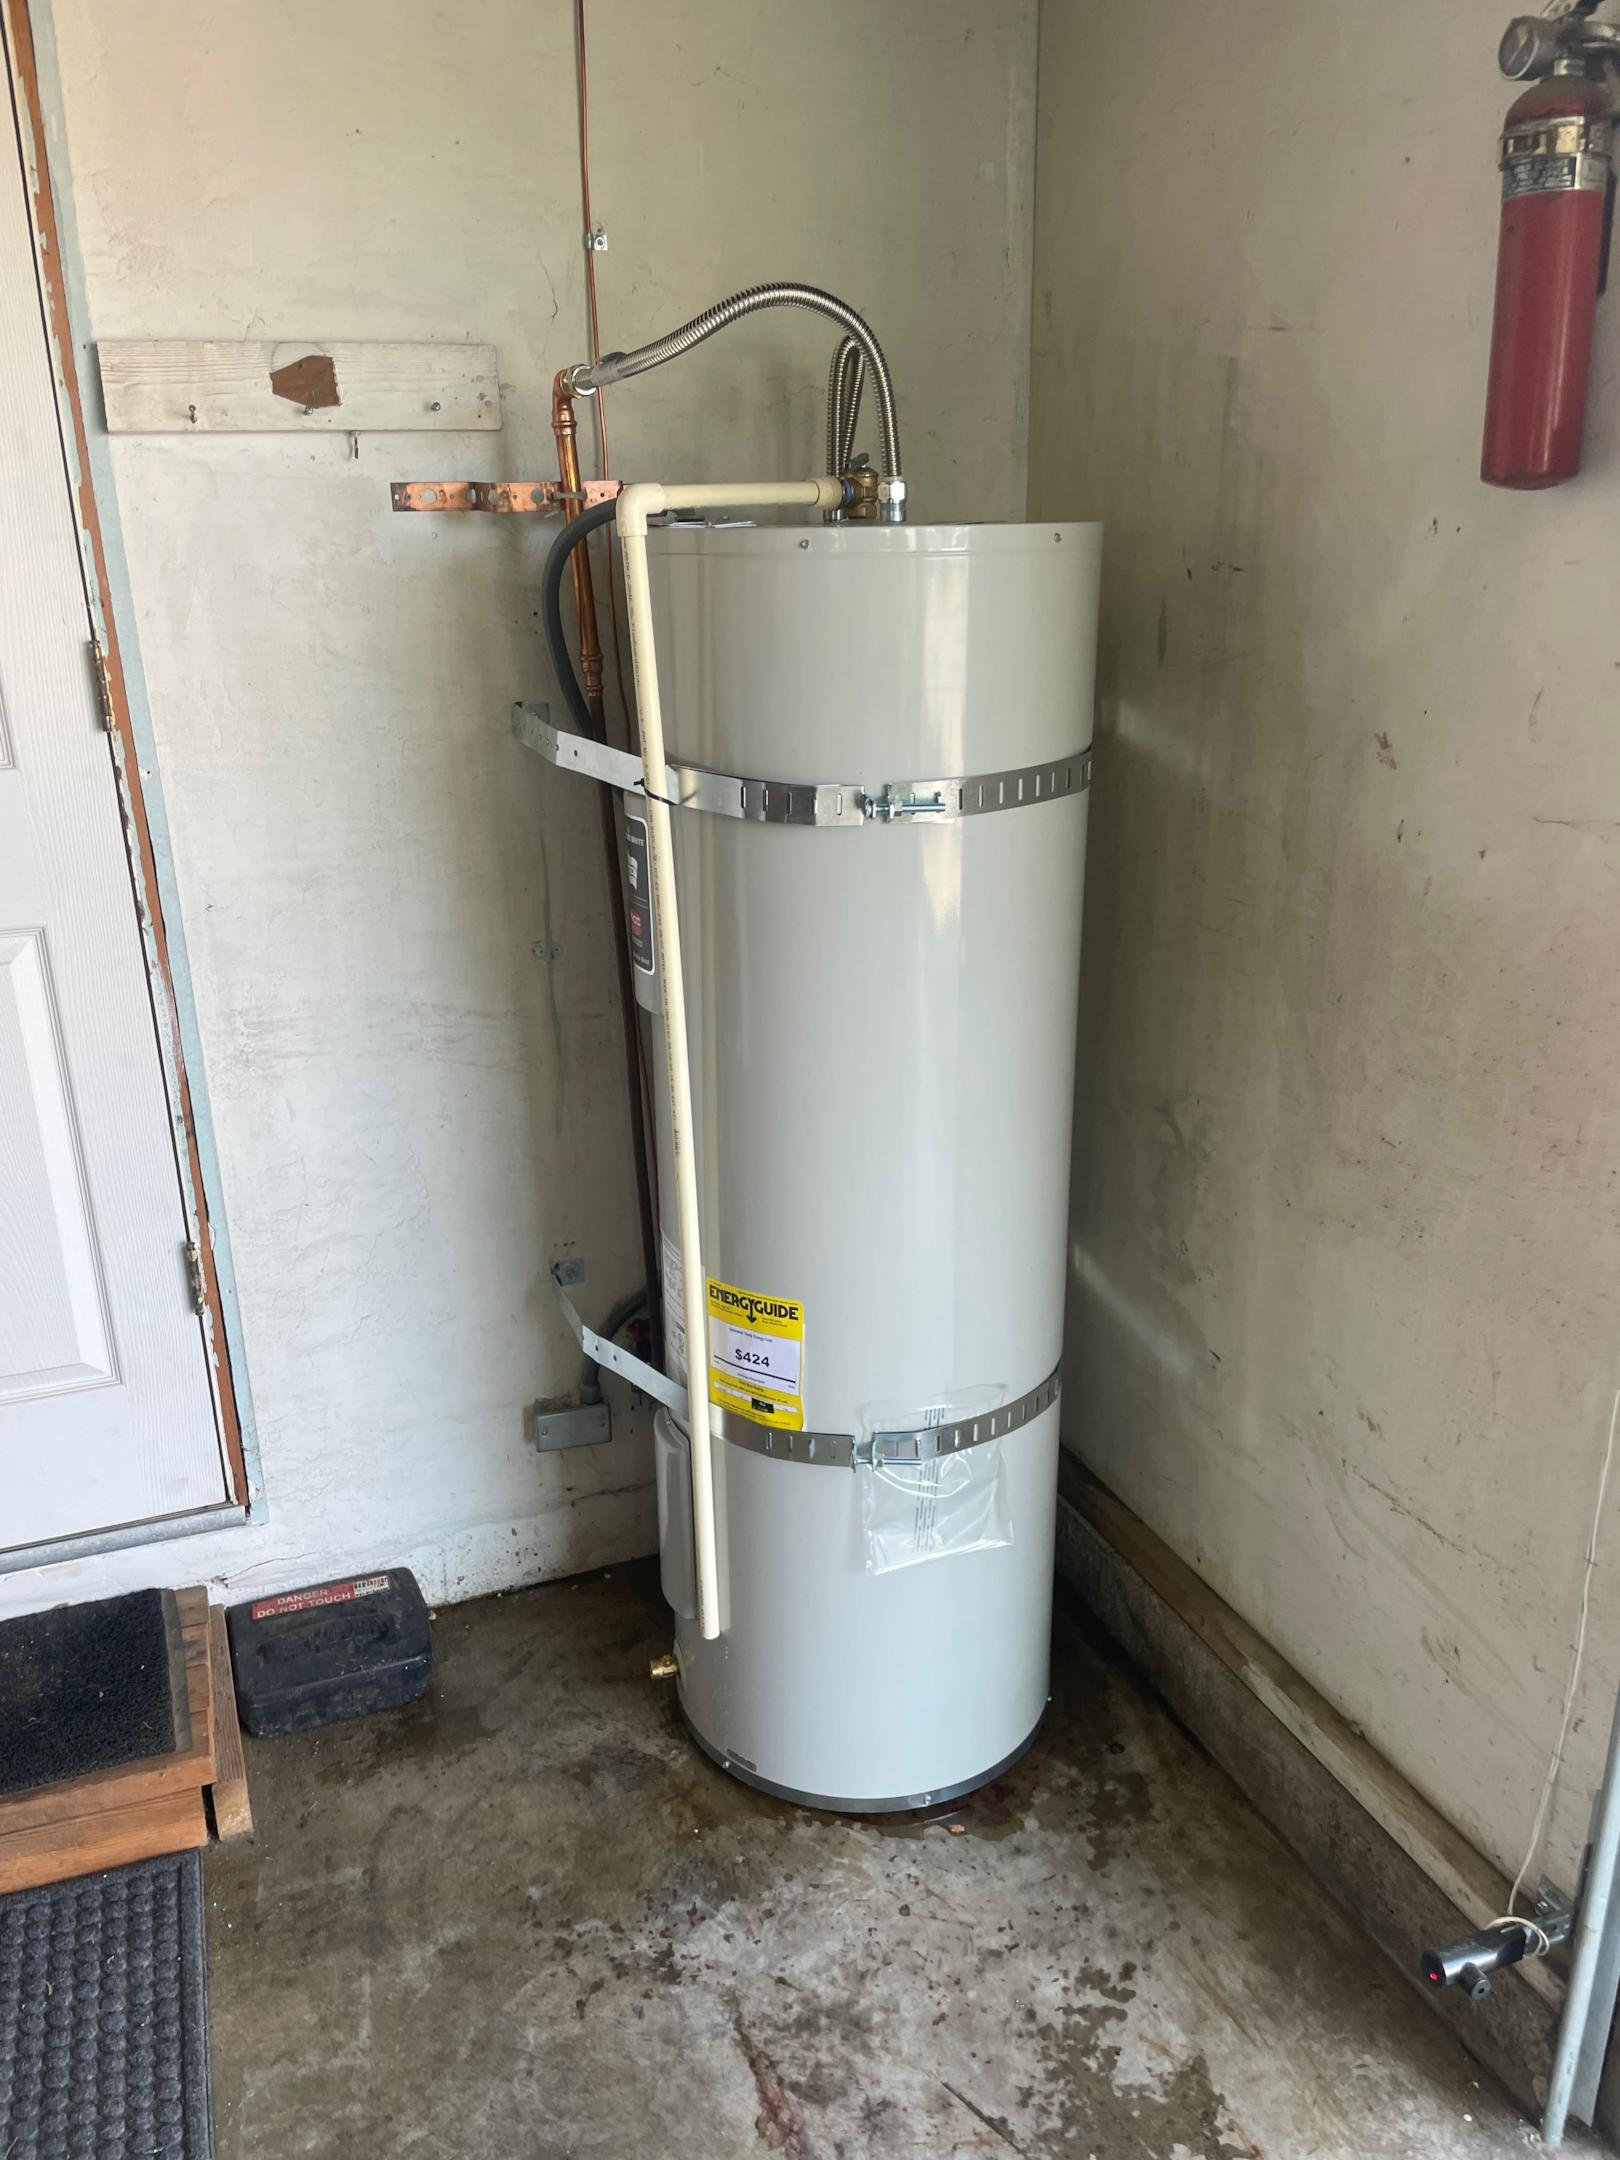 Hot water heater - Water is only lukewarm